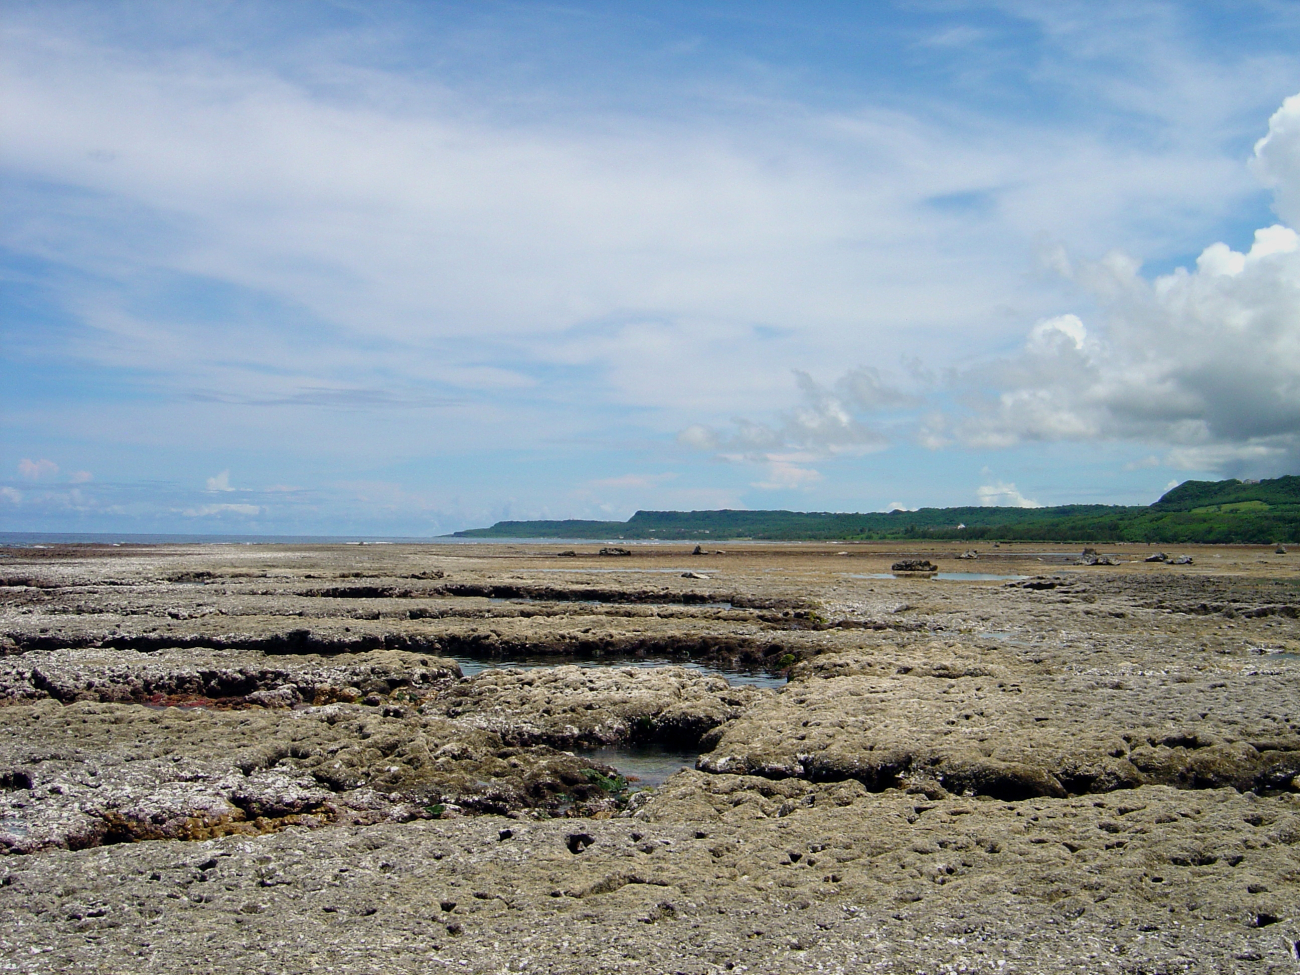 Brown algae in channels while reef flat appears devoid of growth at low tideon Guam coastline